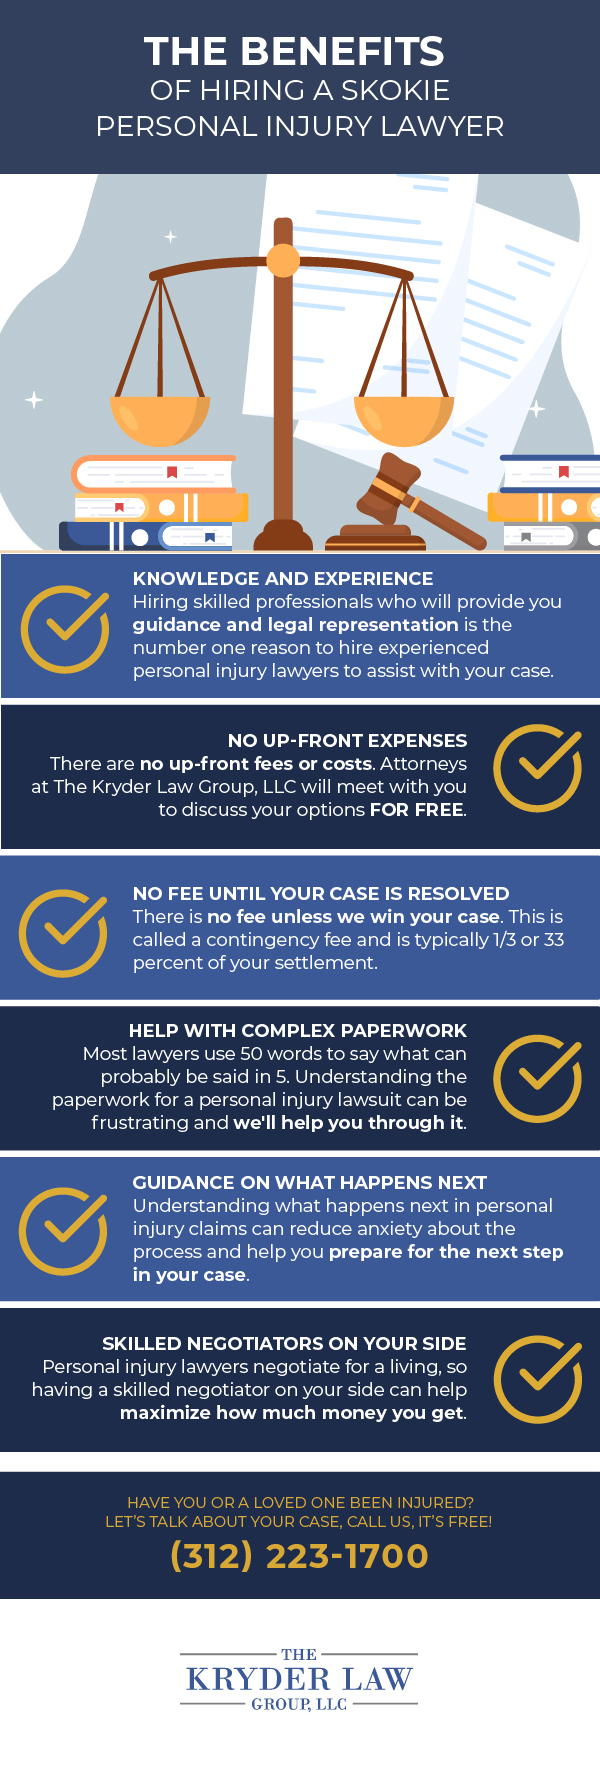 Benefits of Hiring a Skokie Personal Injury Lawyer Infographic